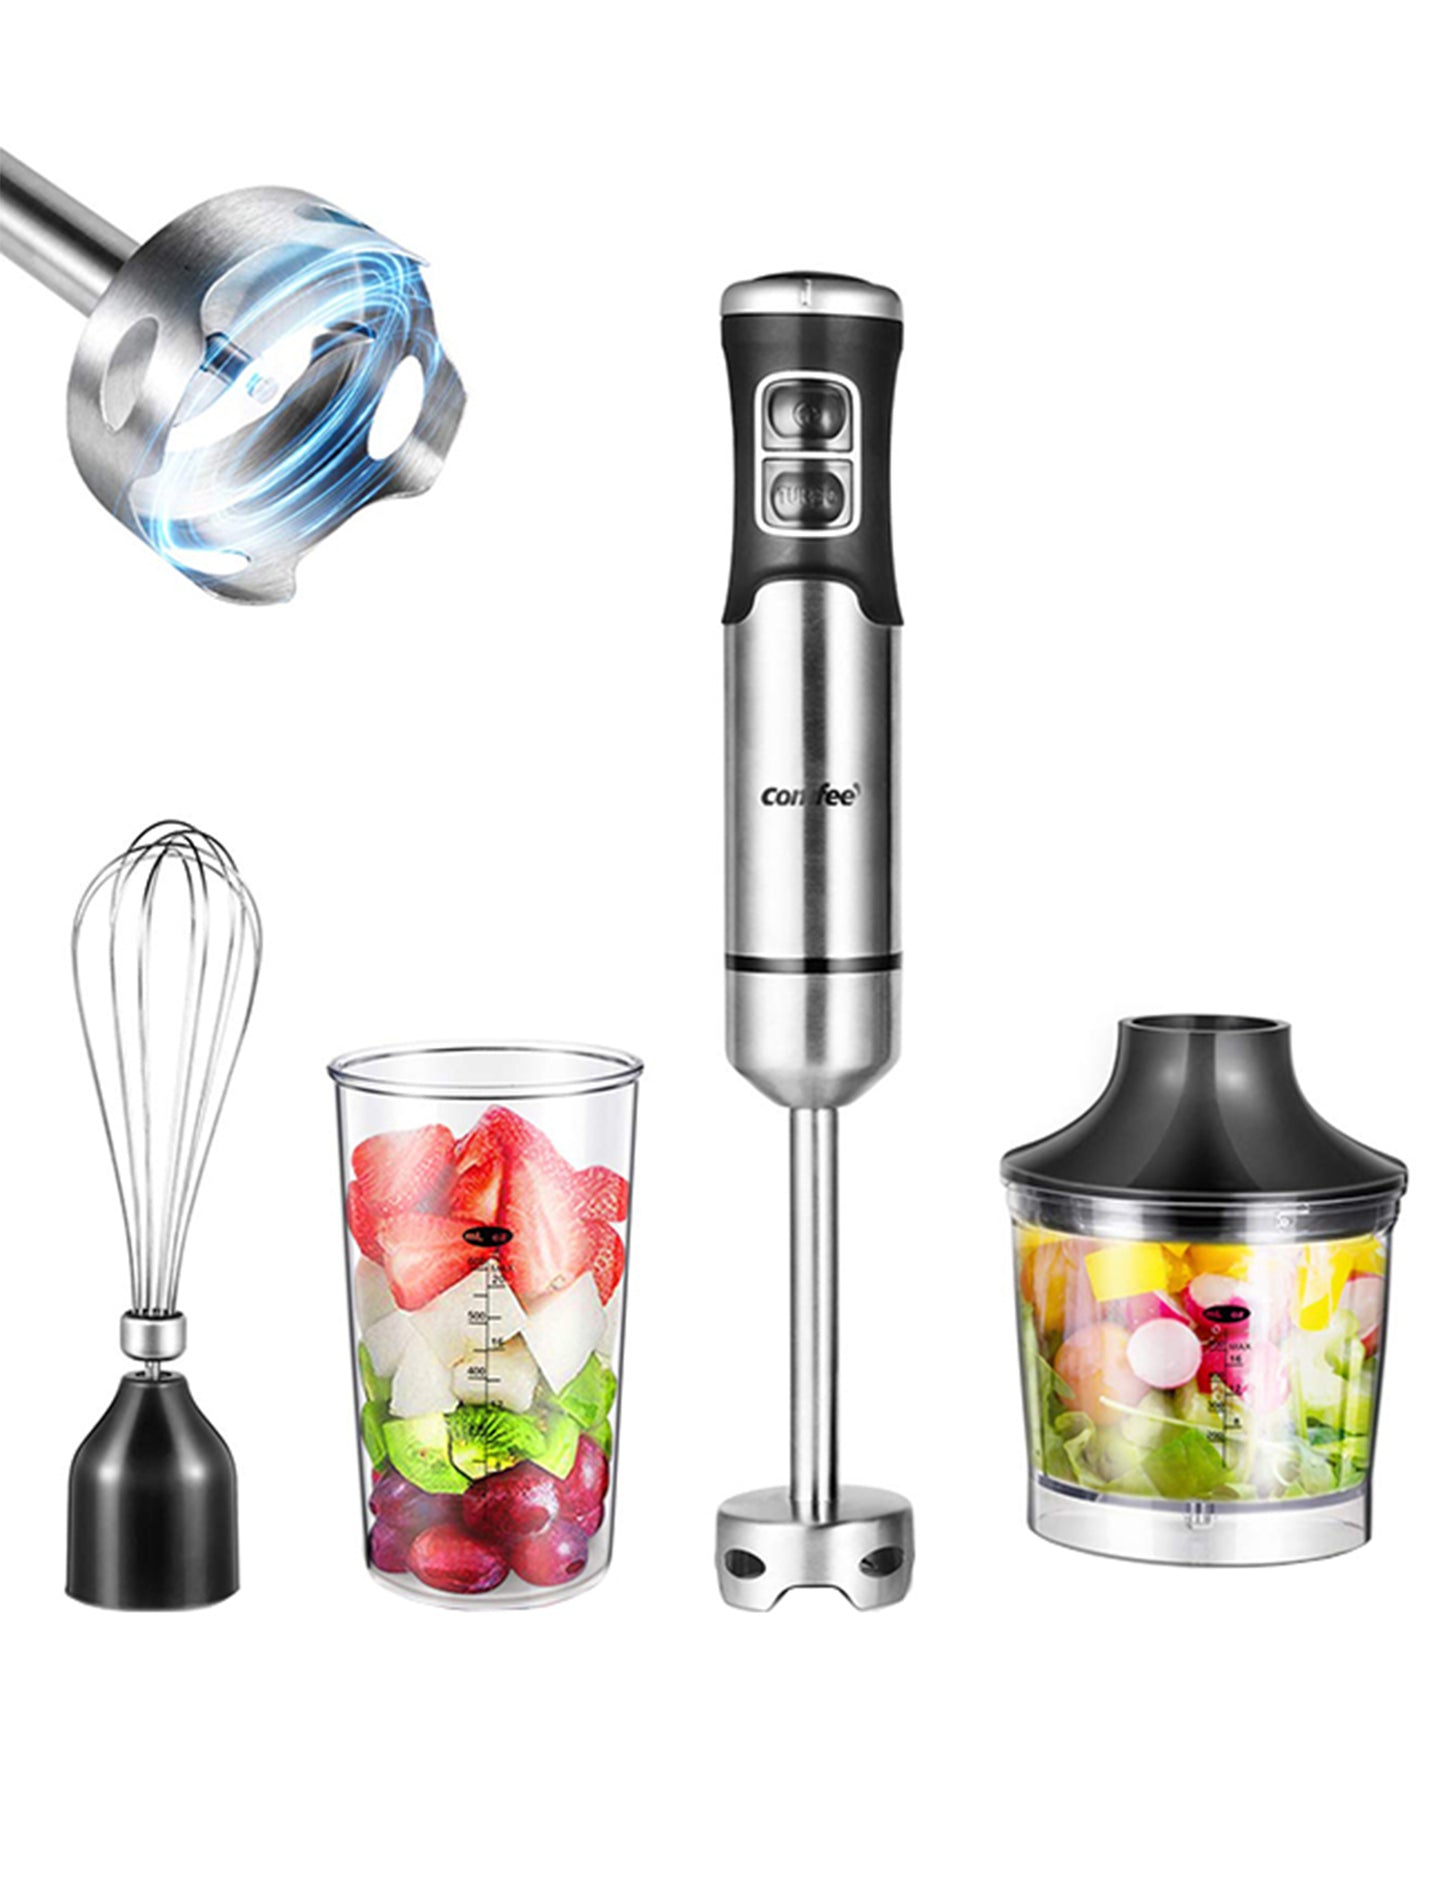 silver immersion blender next to a cup of vegetables